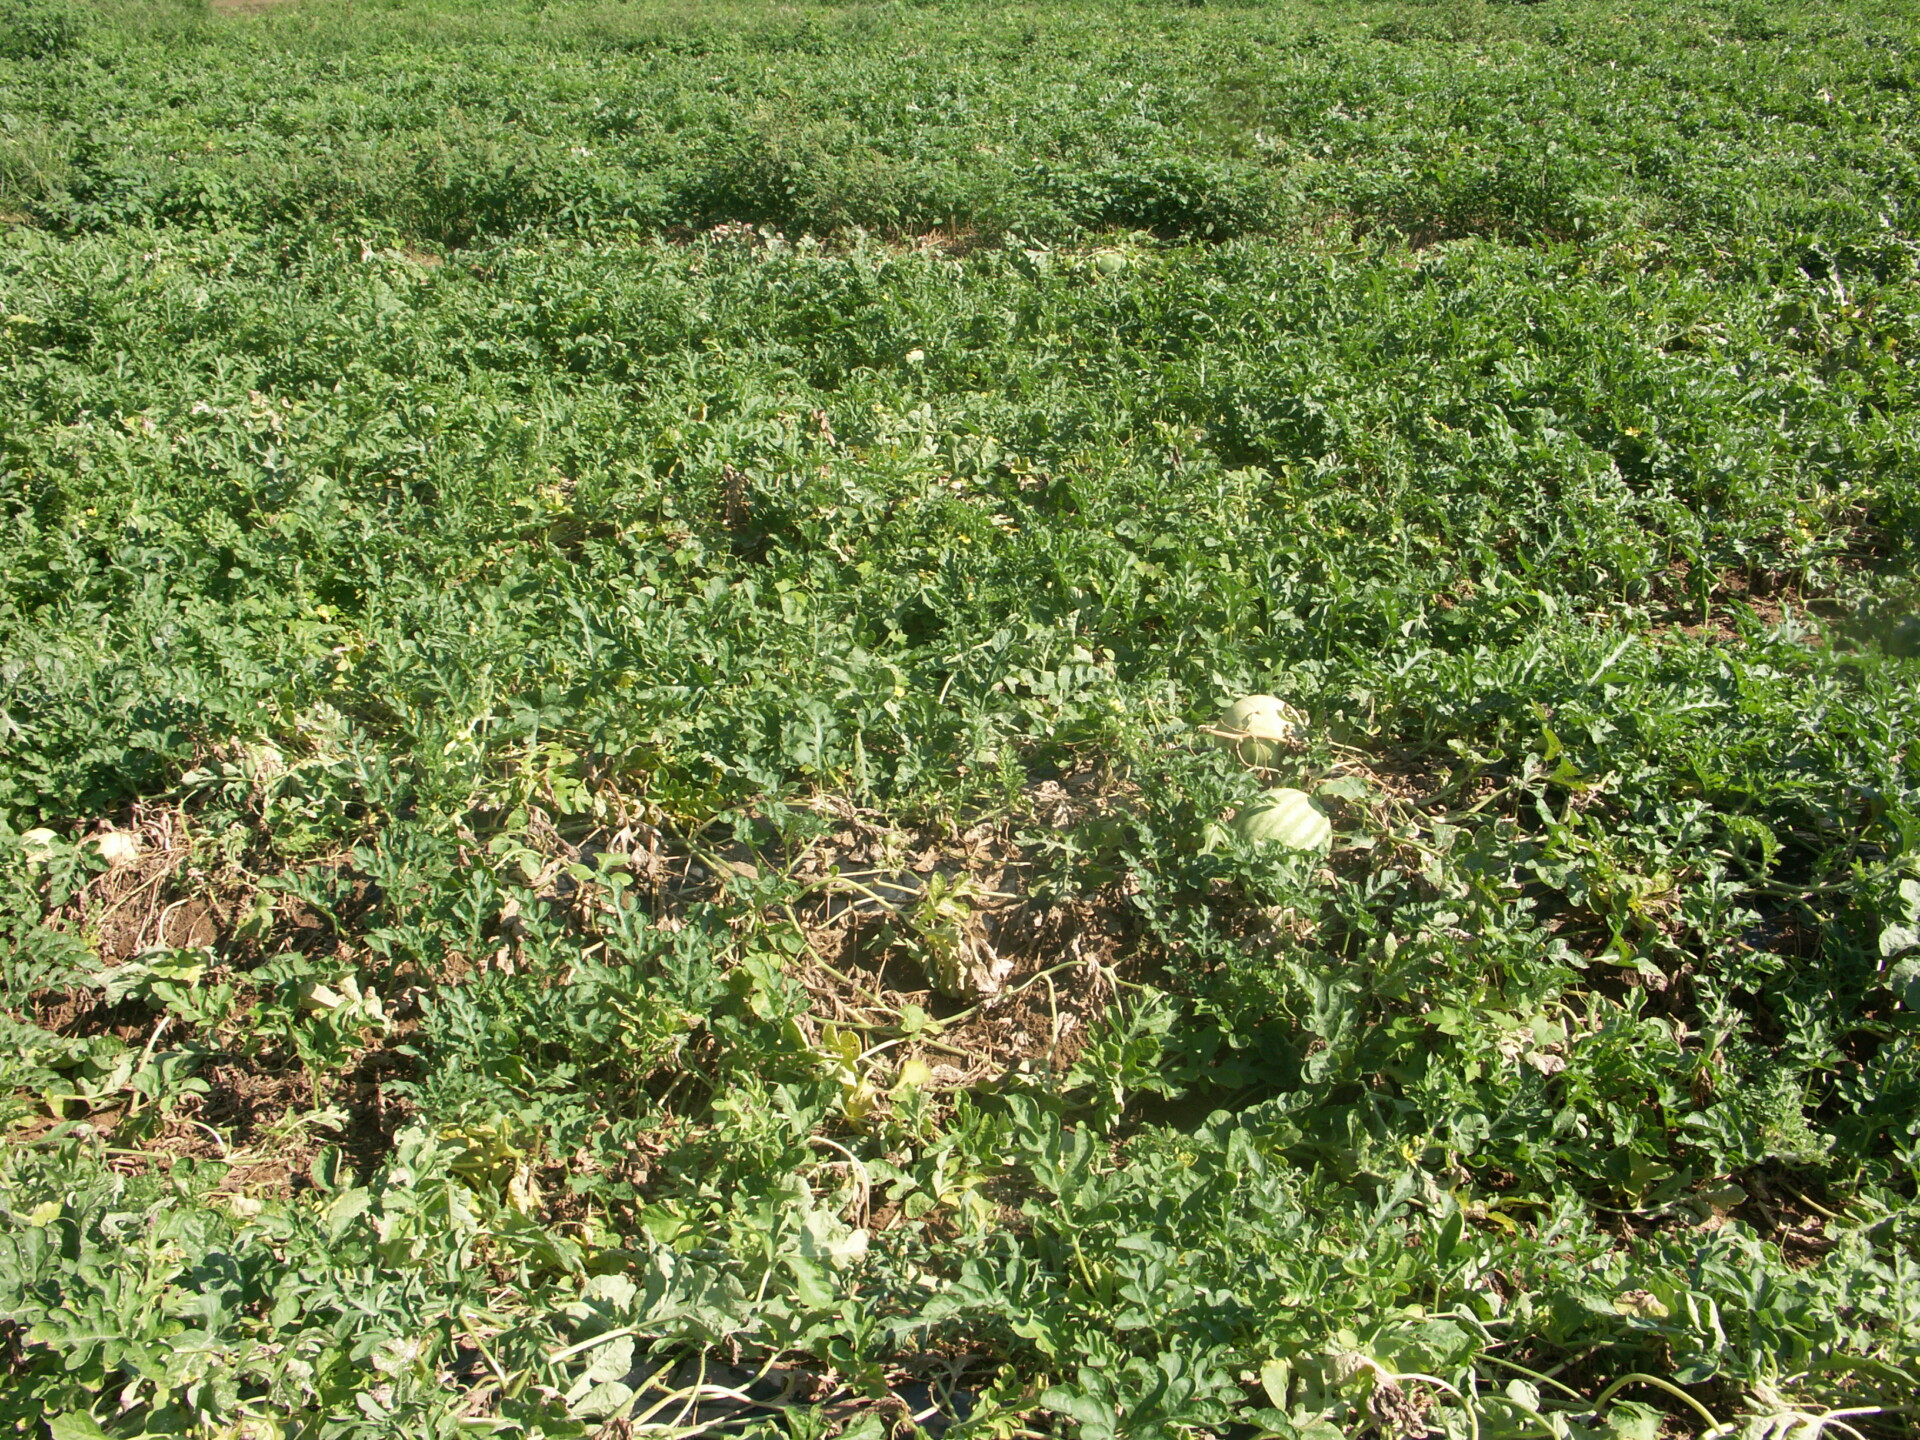 Figure 10. When Fusarium wilt in watermelon occurs in late season, wilt and collapse of vines such as seen here in the foreground may occur.